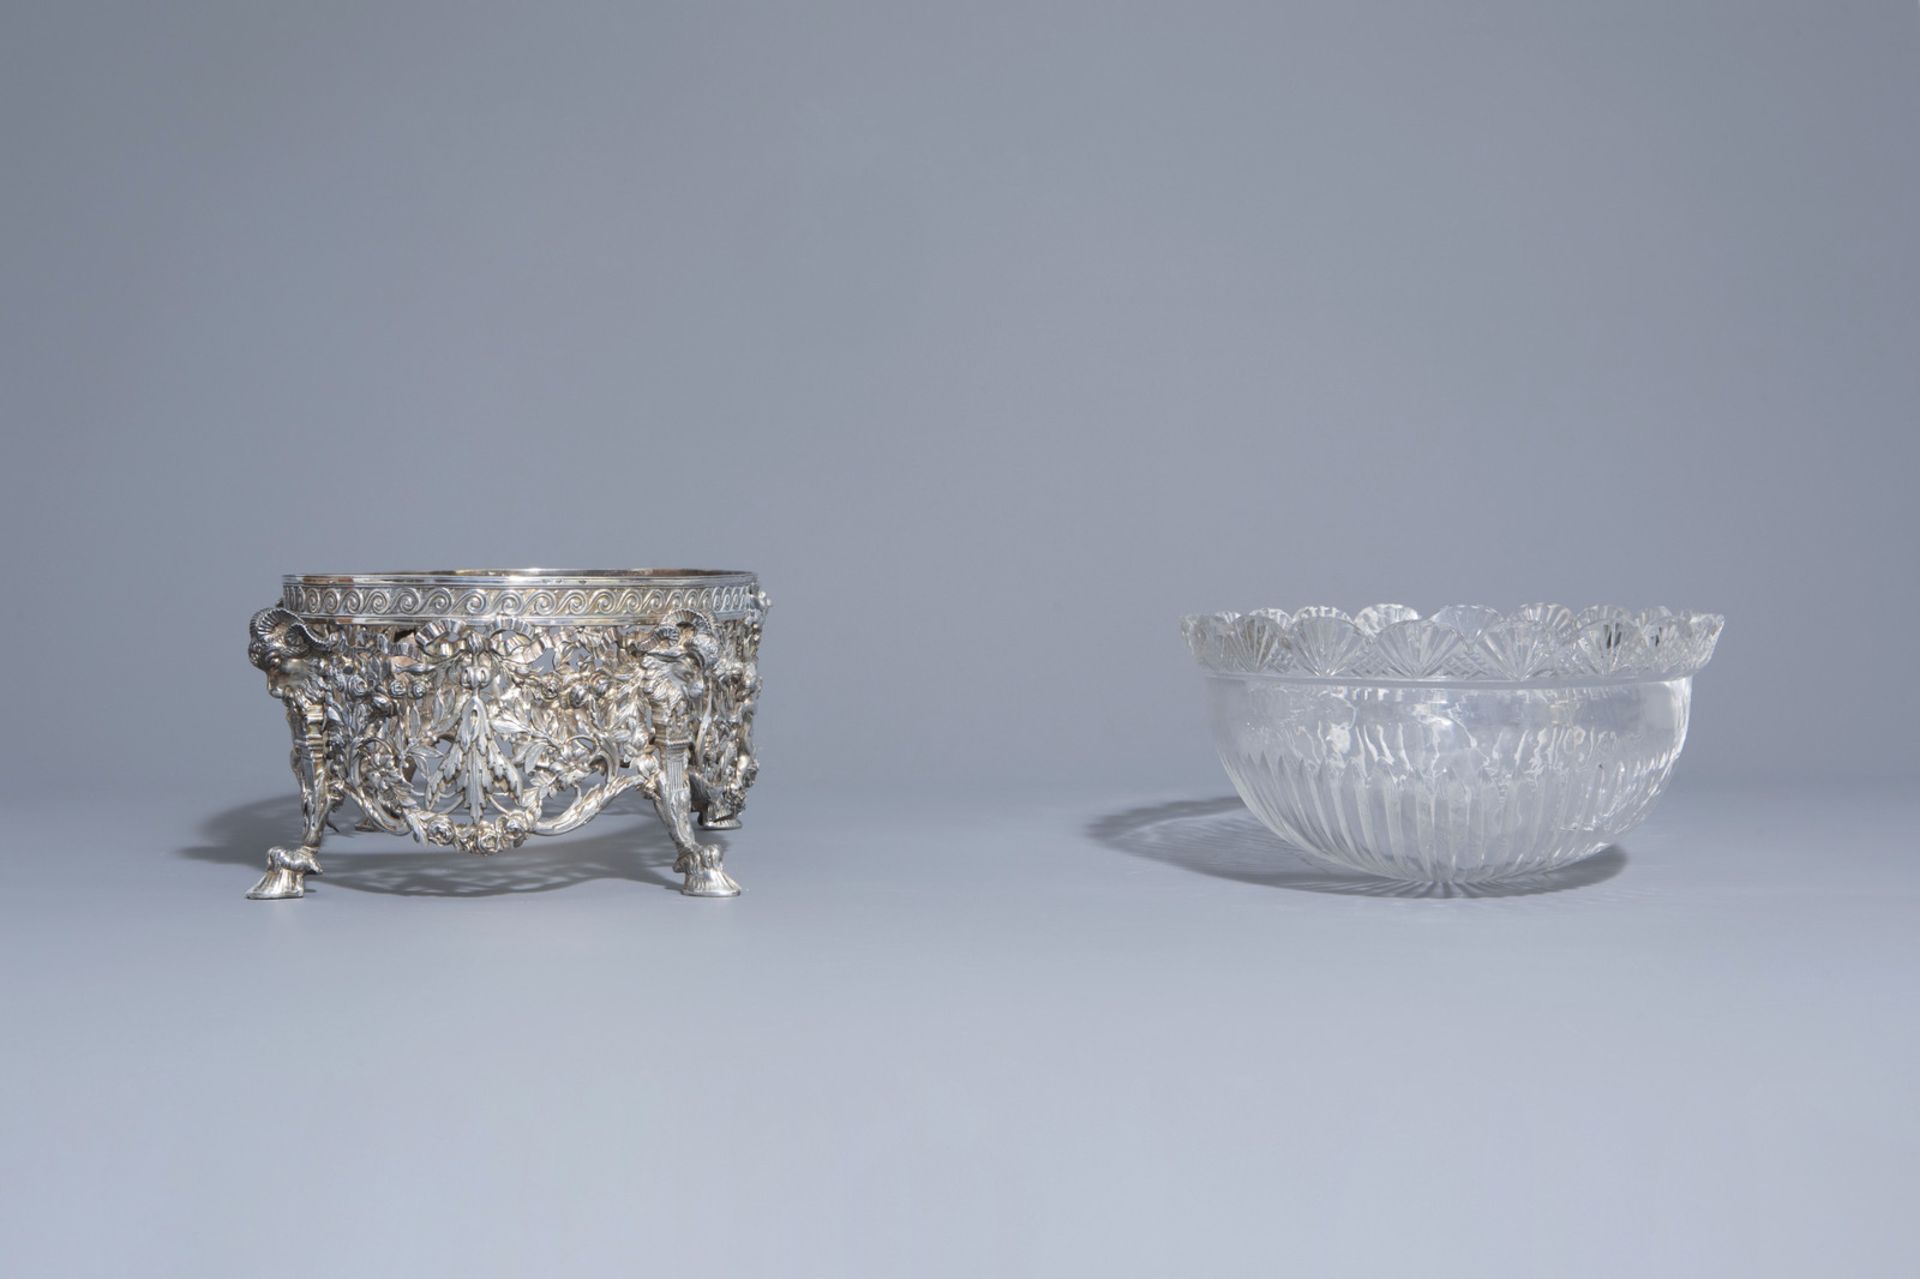 An imposing silver centerpiece with love theme and floral design with accompanying bowl, France, 19t - Image 3 of 10